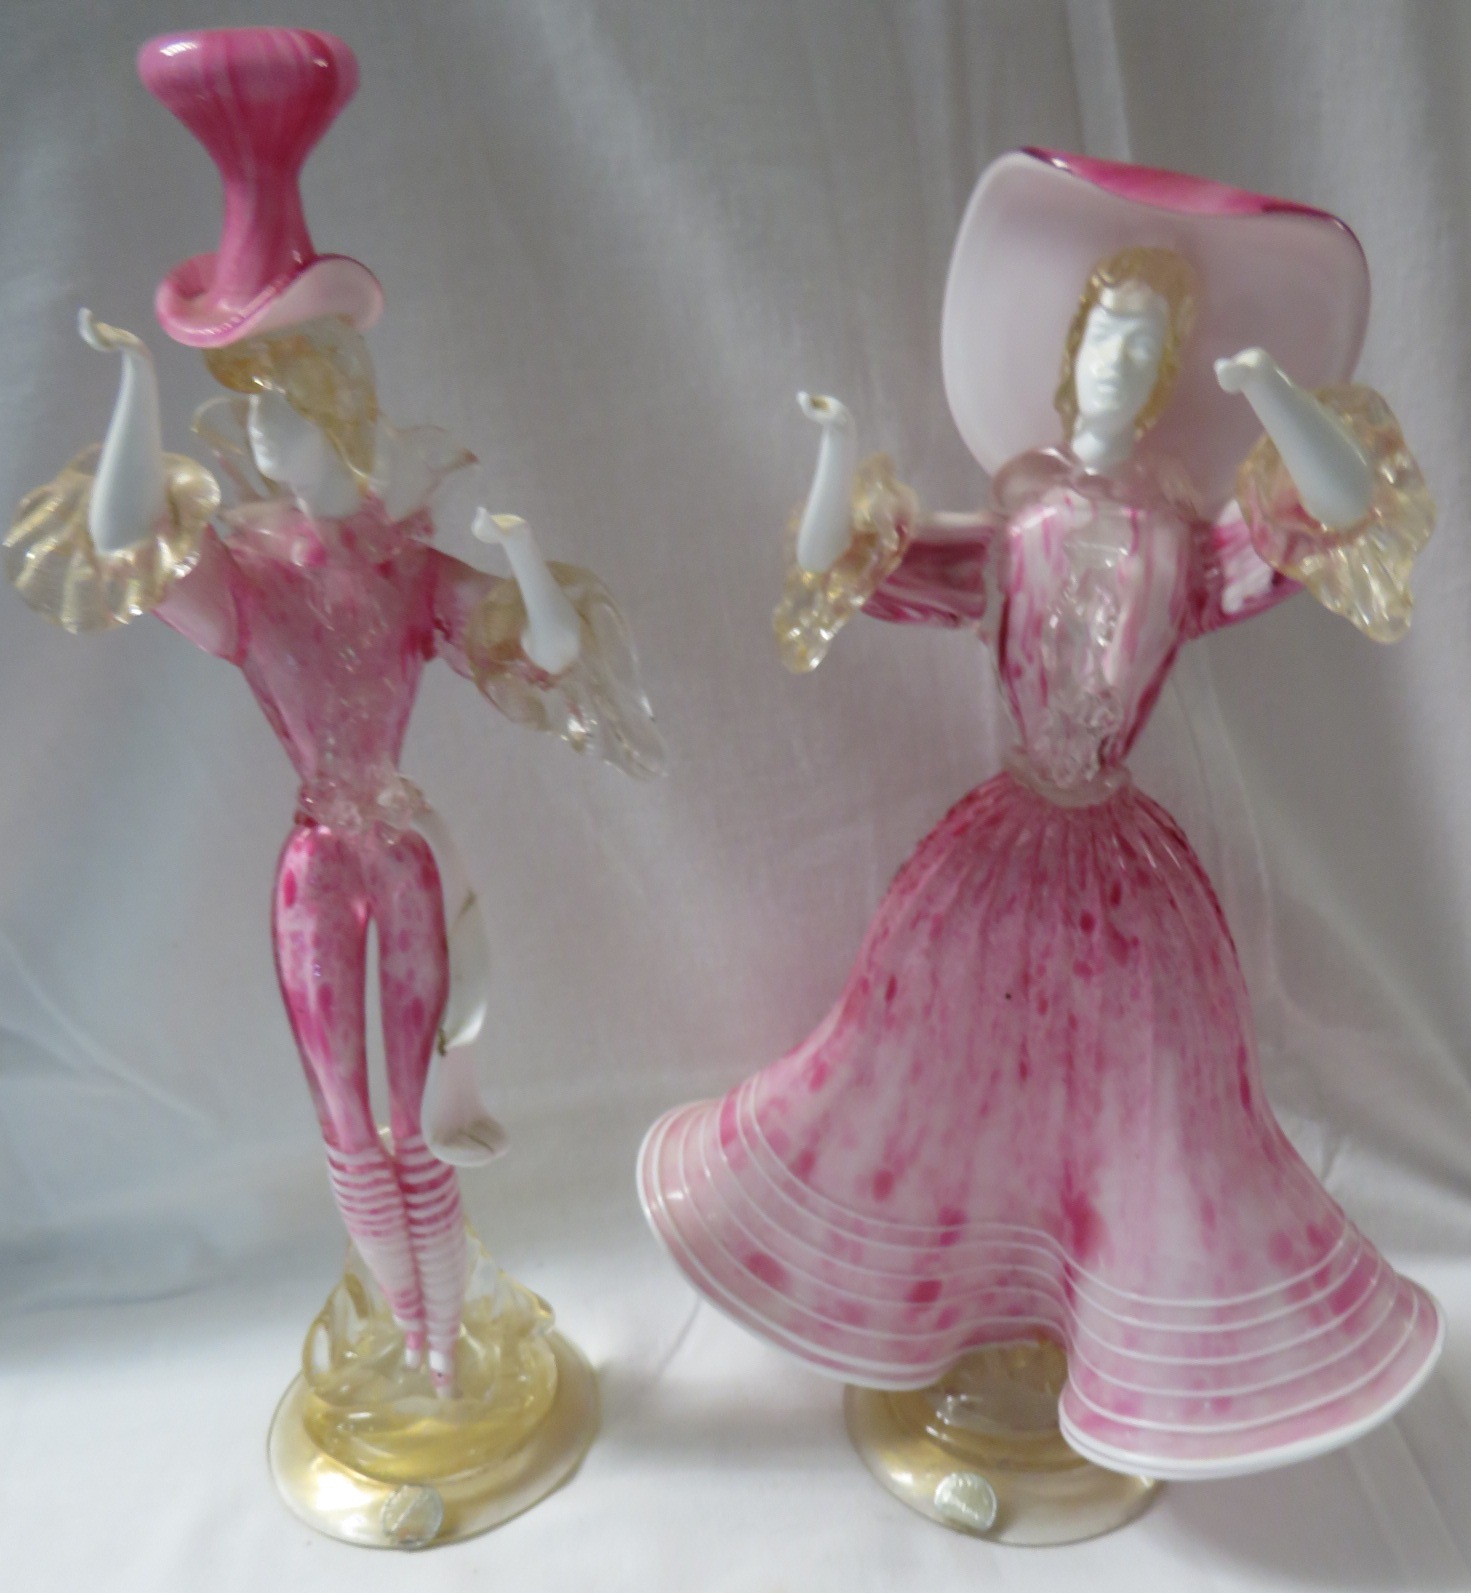 Two Murano glass figures - a man with overlaid pink top hat and underglaze pink glass body with